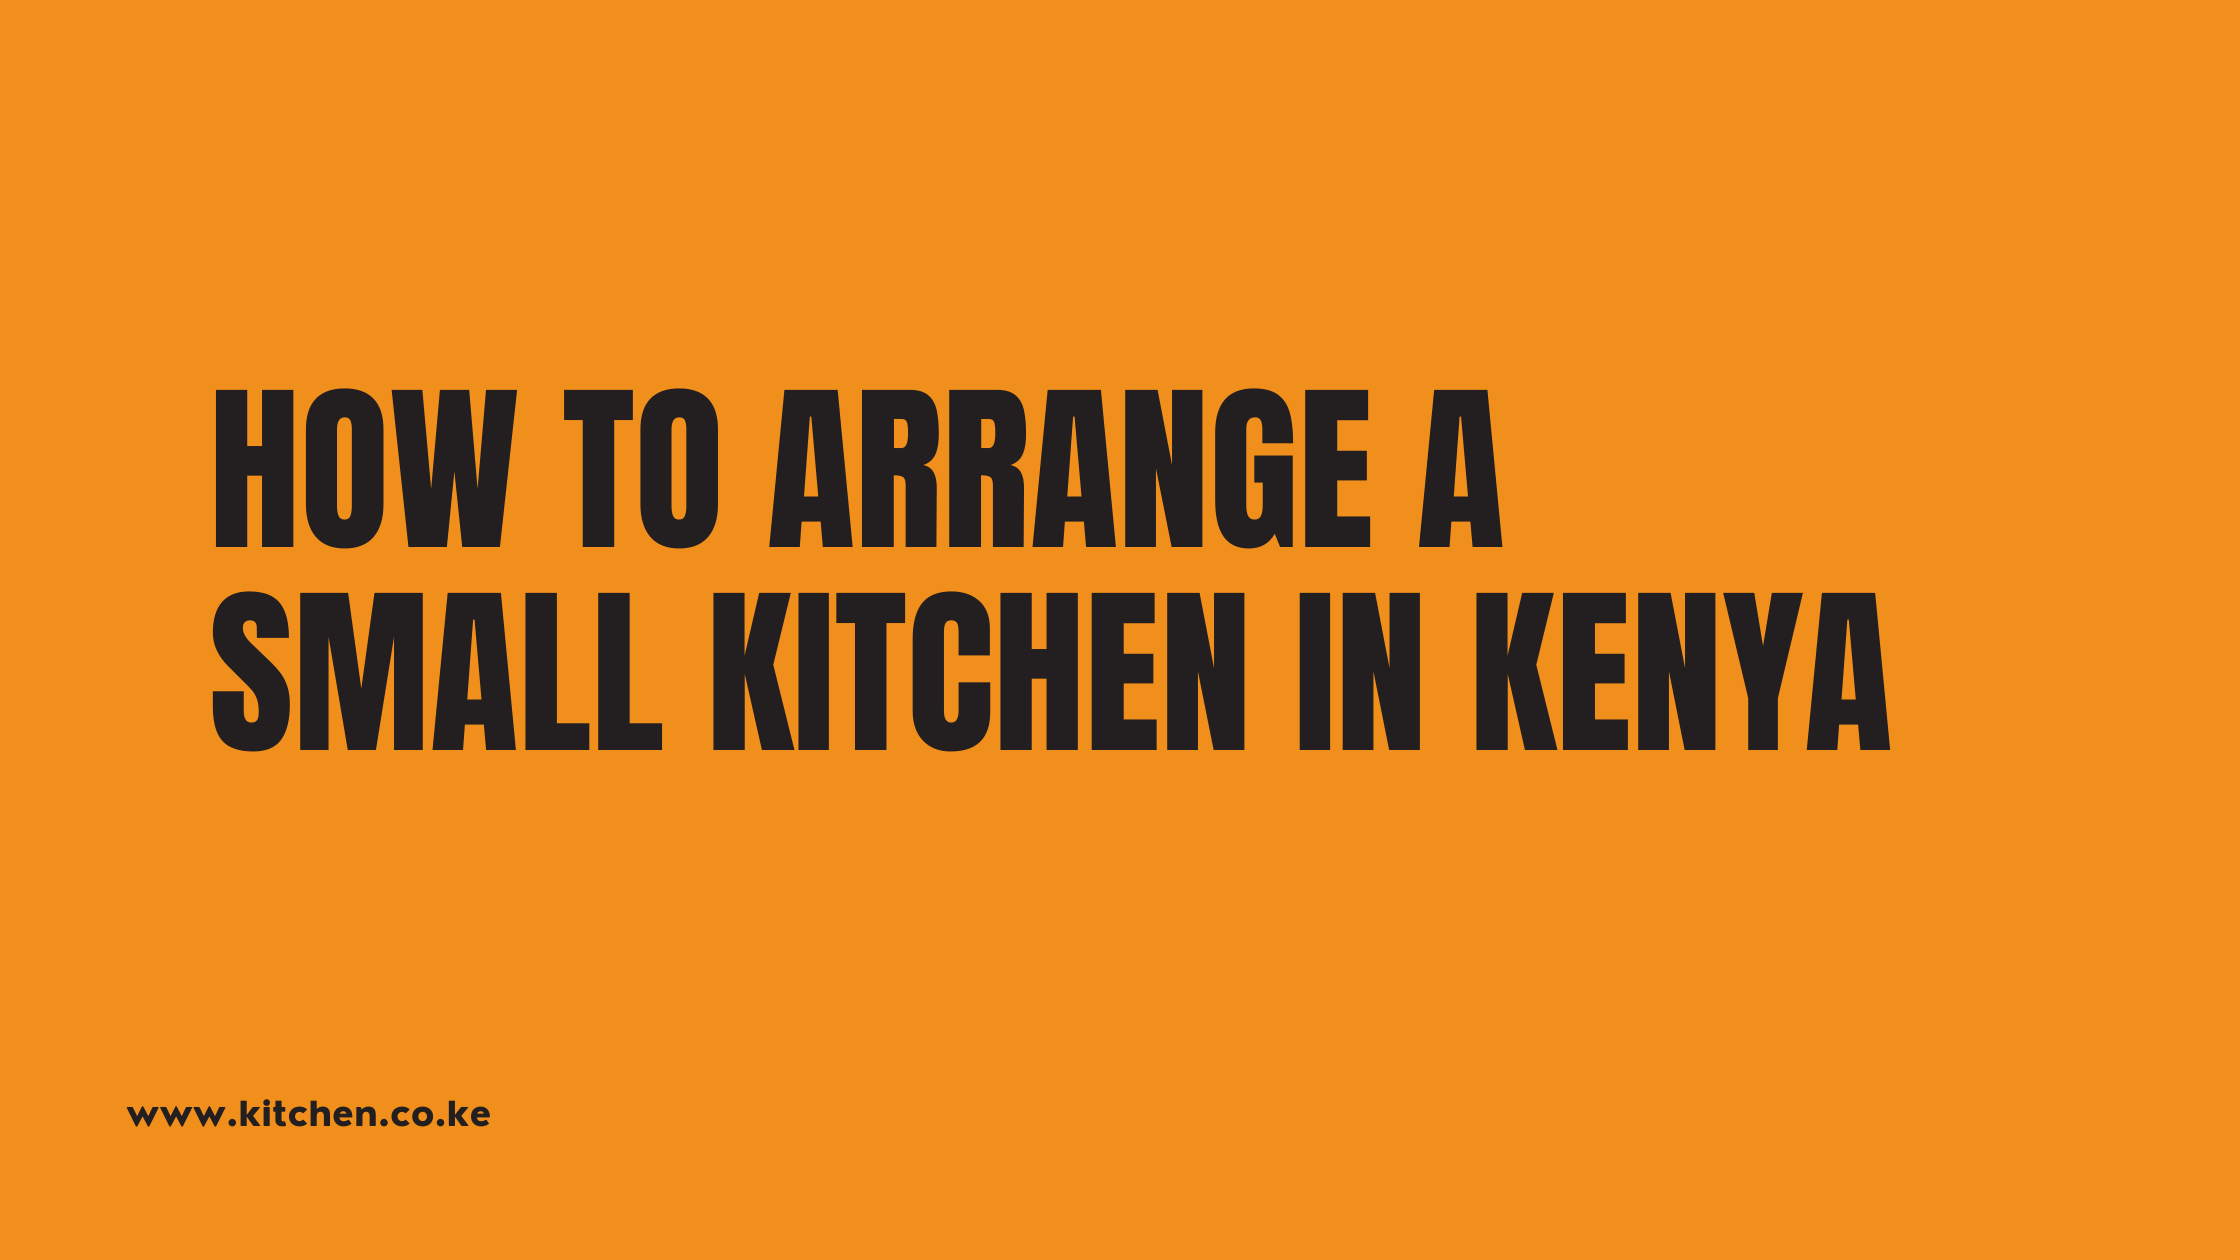 How To Arrange a Small Kitchen in Kenya